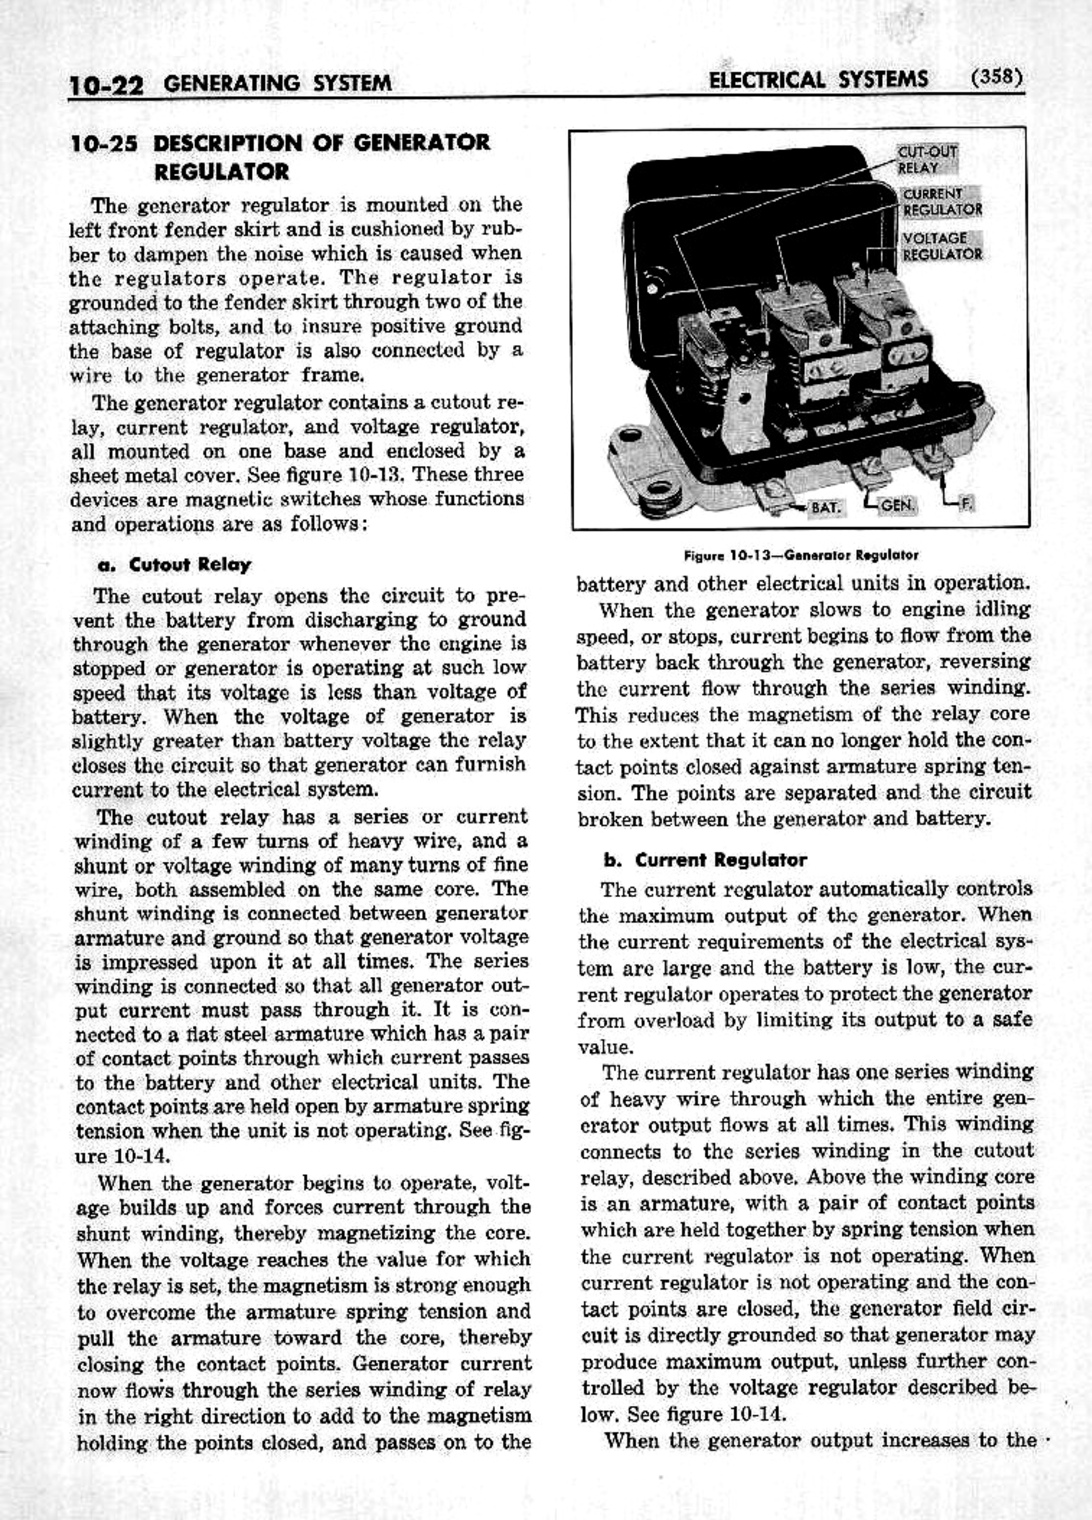 n_11 1952 Buick Shop Manual - Electrical Systems-022-022.jpg